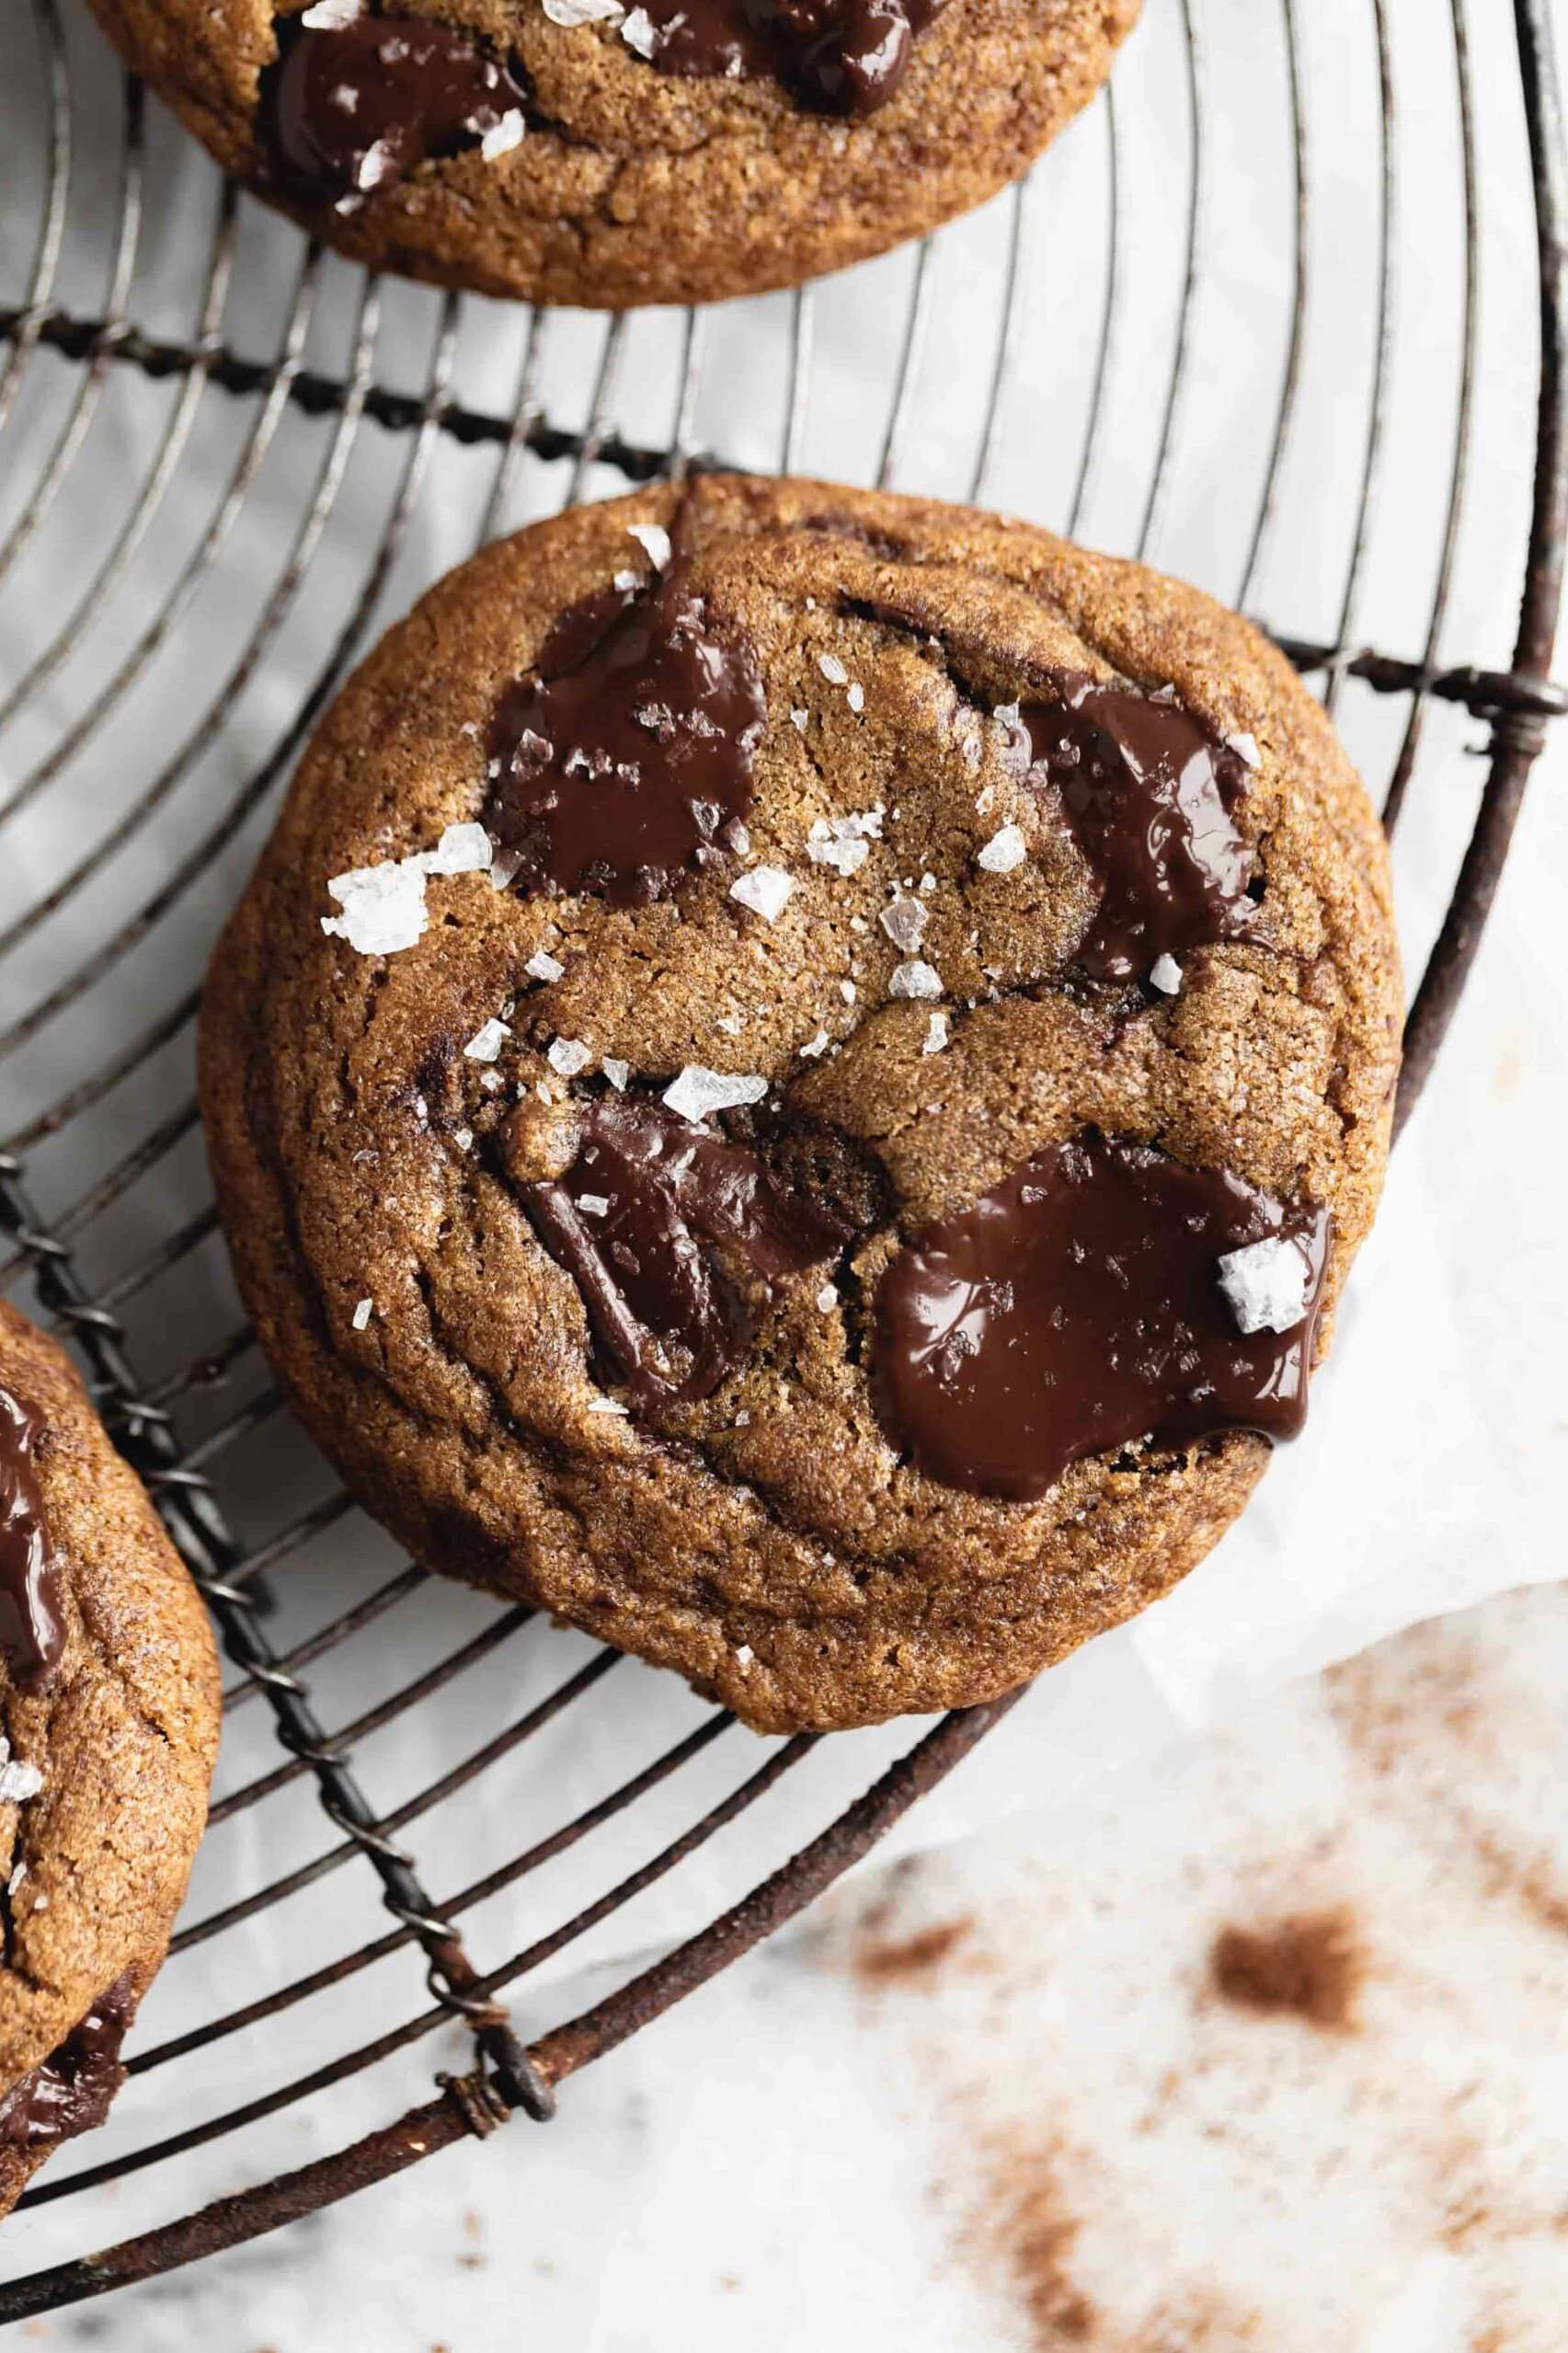  Get ready to dunk these delightful cookies in your morning brew.